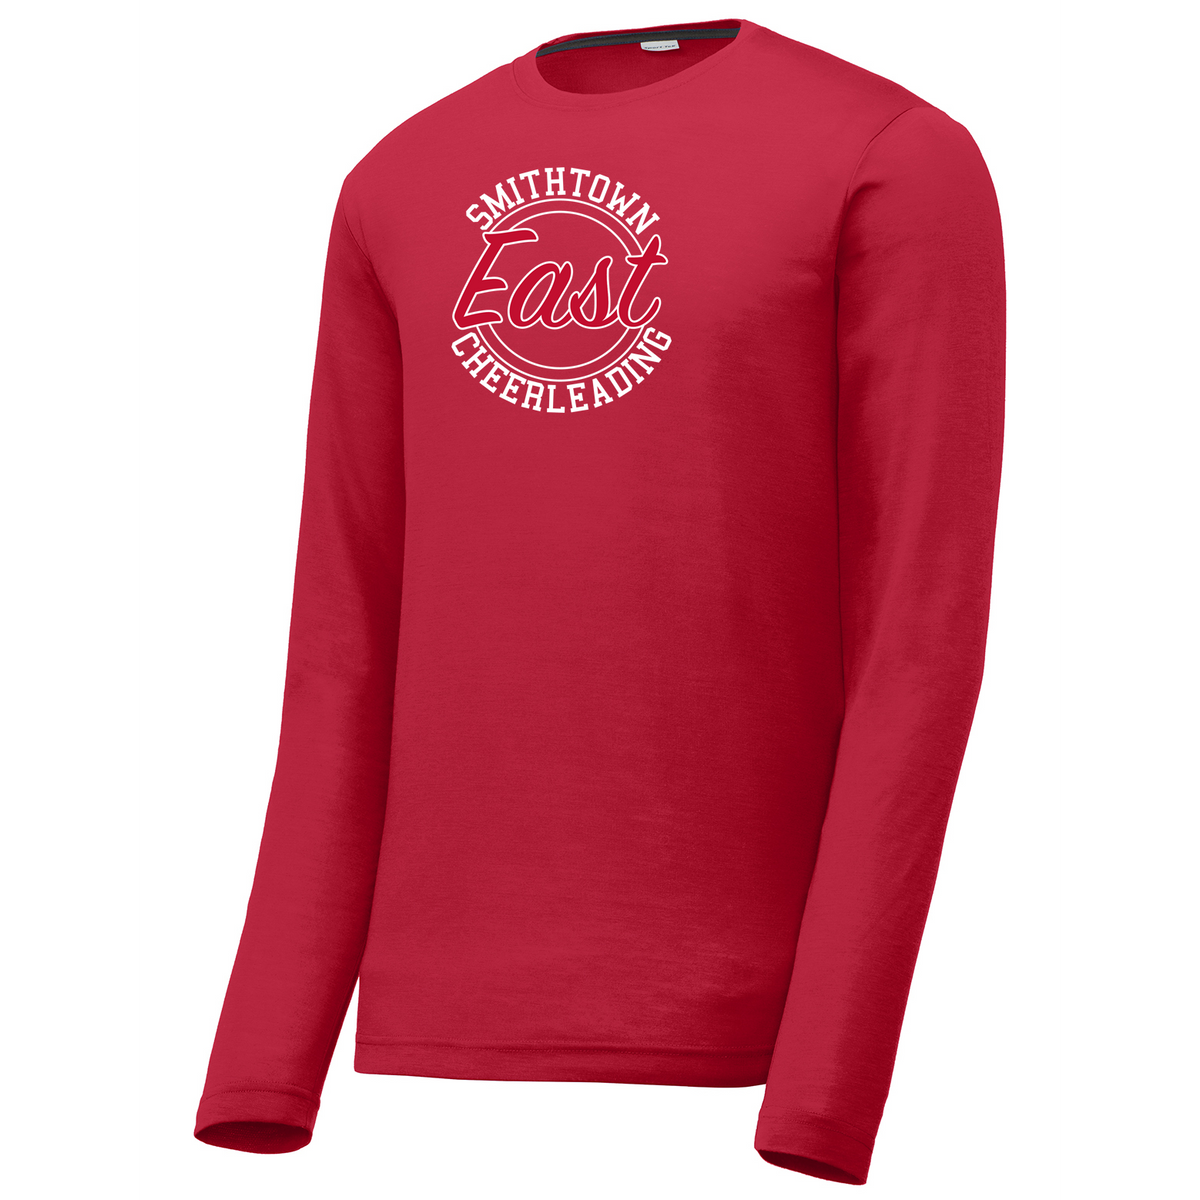 Smithtown East Cheer Long Sleeve CottonTouch Performance Shirt